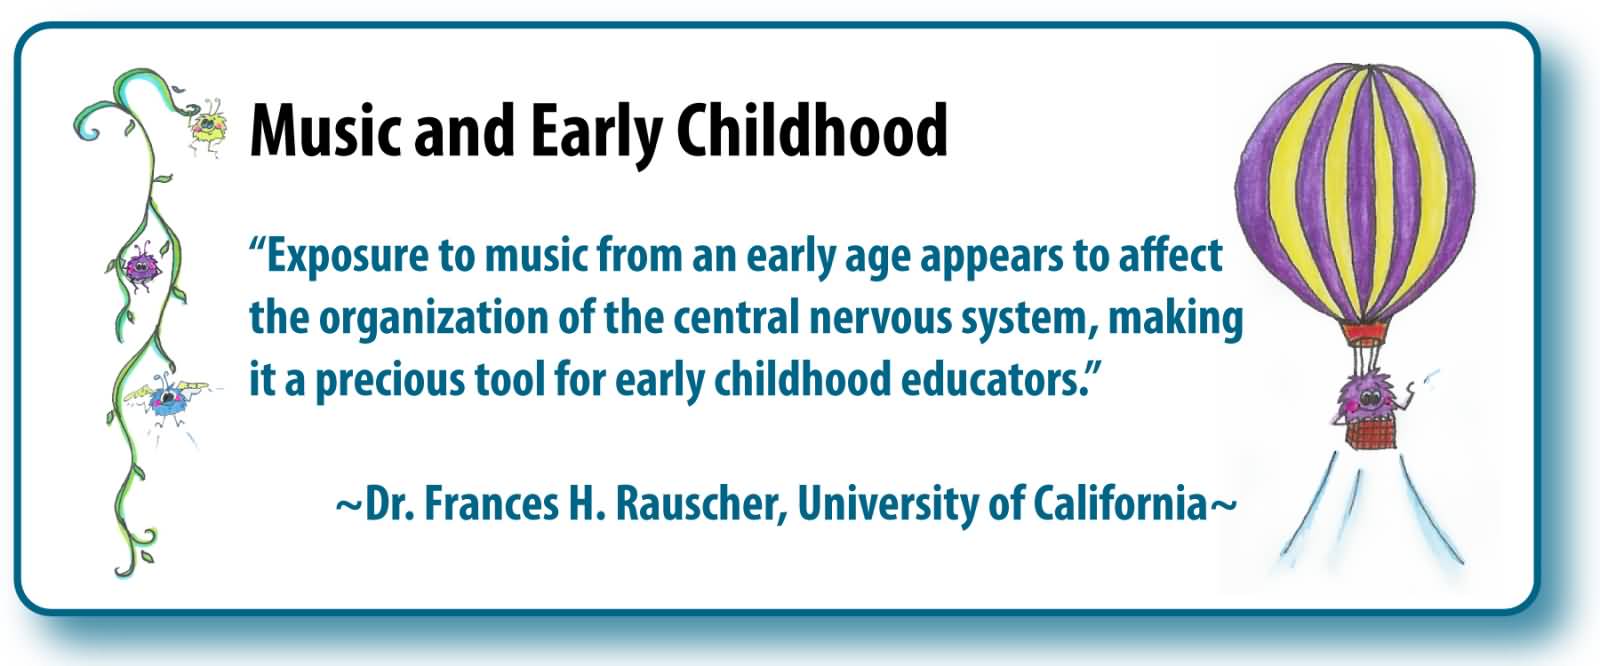 Exposure to music at an early age appears to affect the organization of the central nervous system making it a precious tool for early childhood educators.